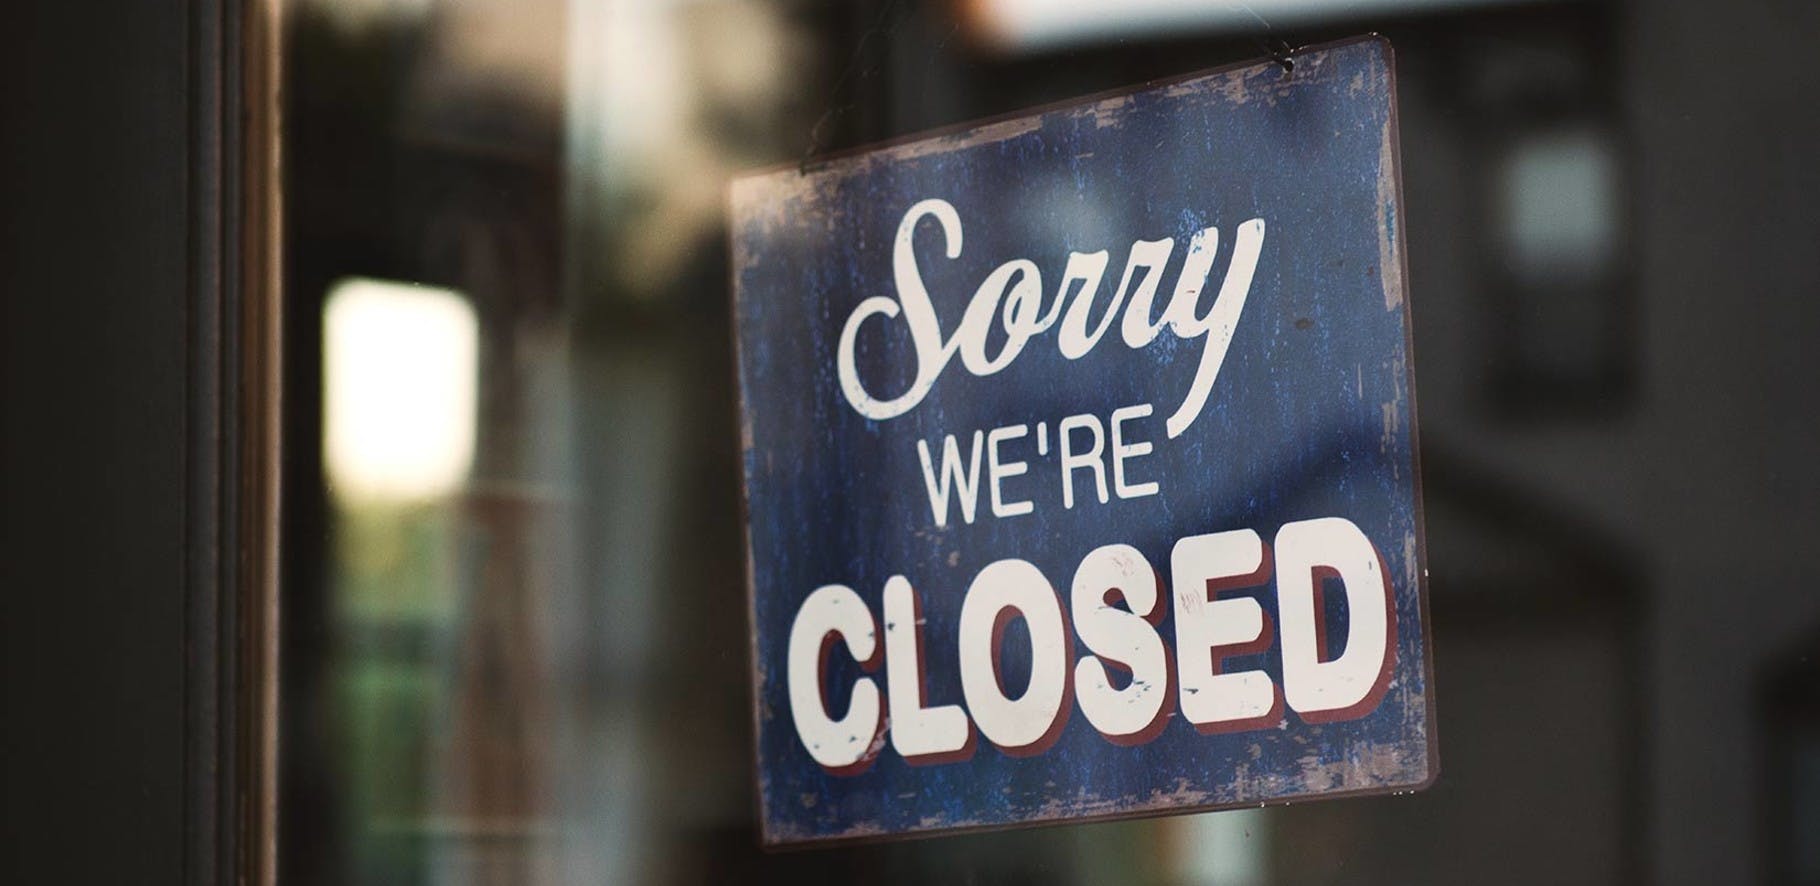 retro sign hanging in the doorway of a business saying sorry we're closed